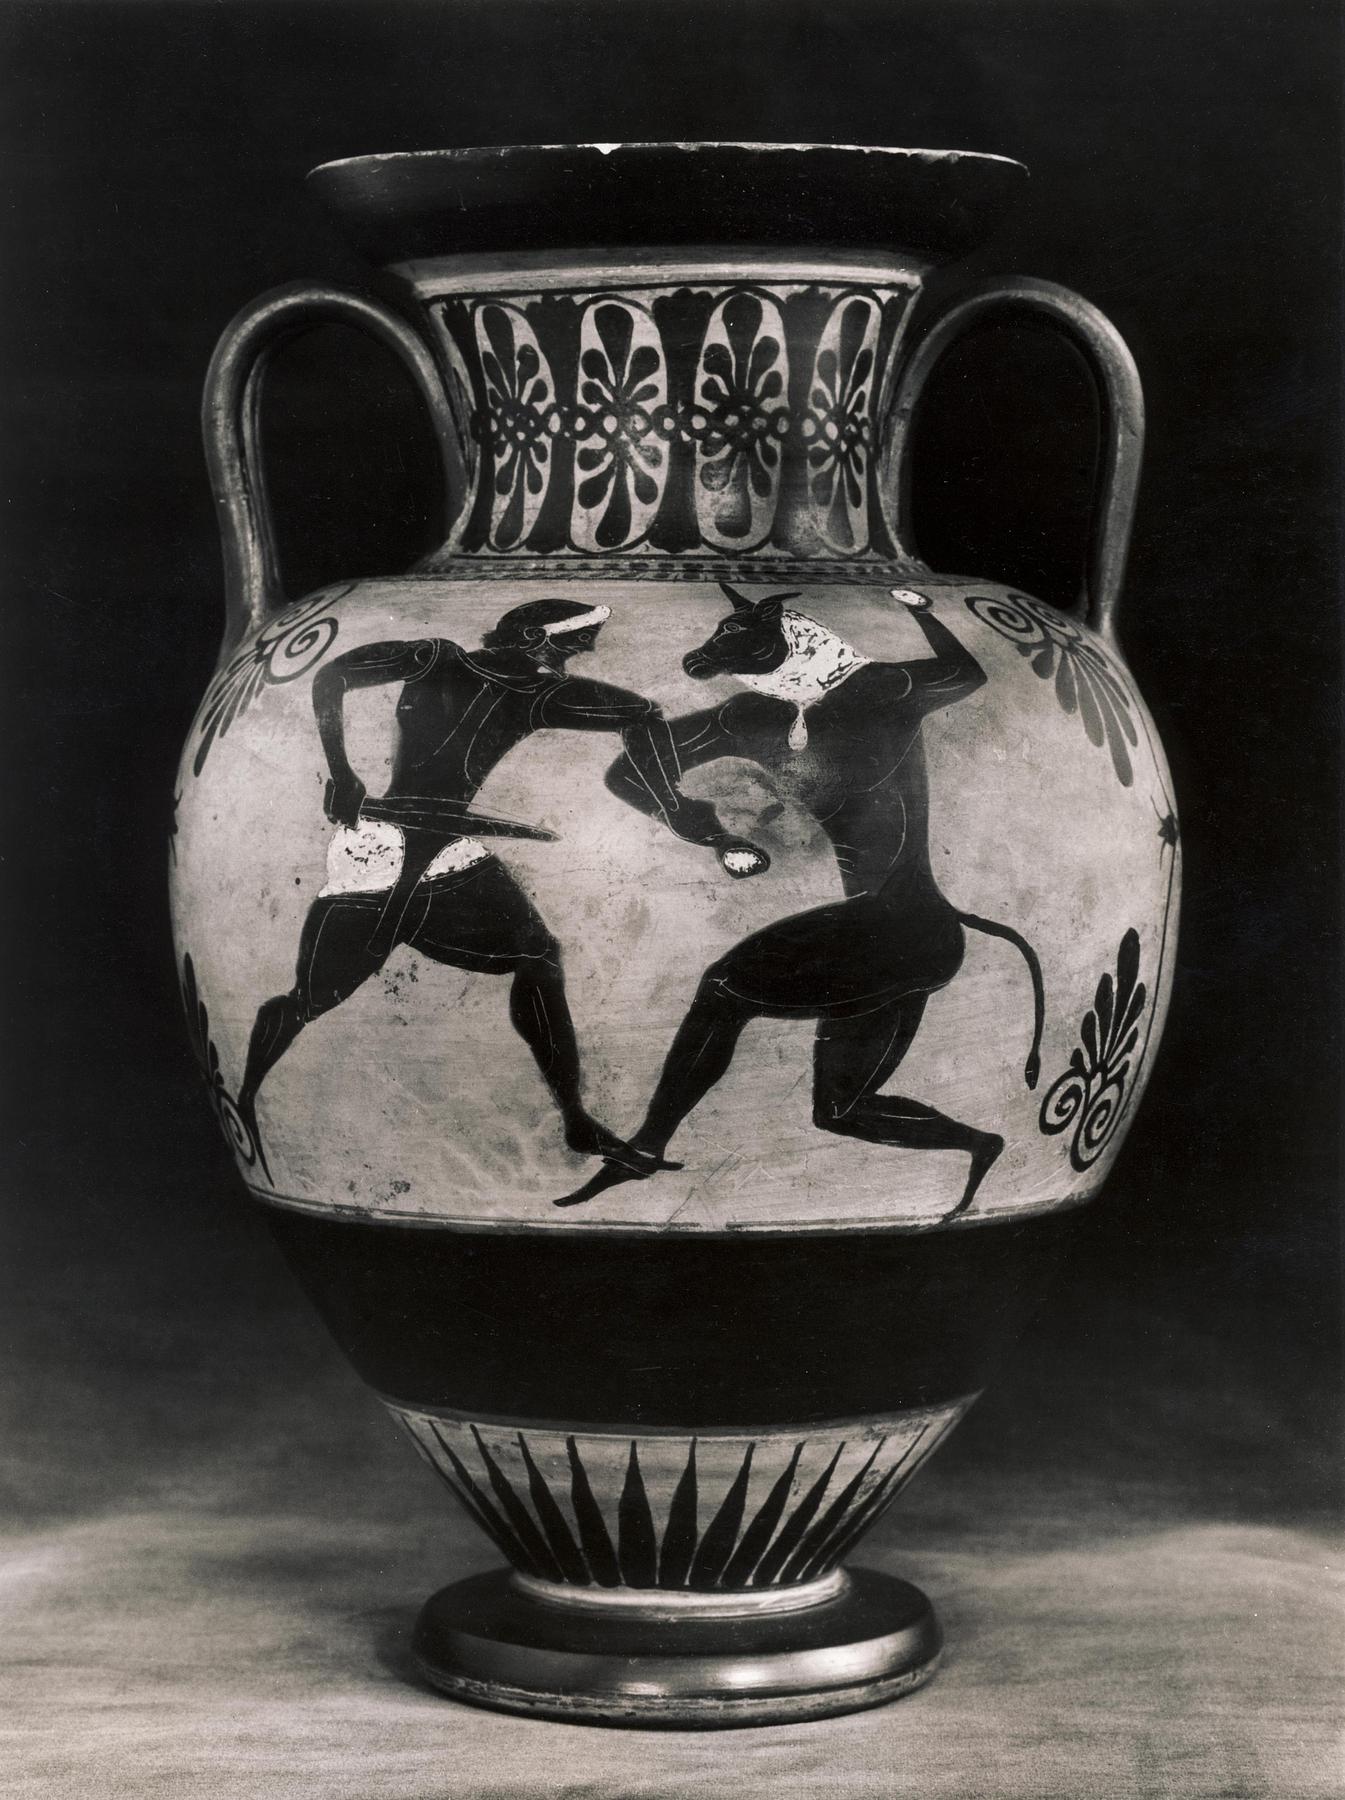 Amphora with Theseus fighting the Minotaur (A) and two runners (B), H547